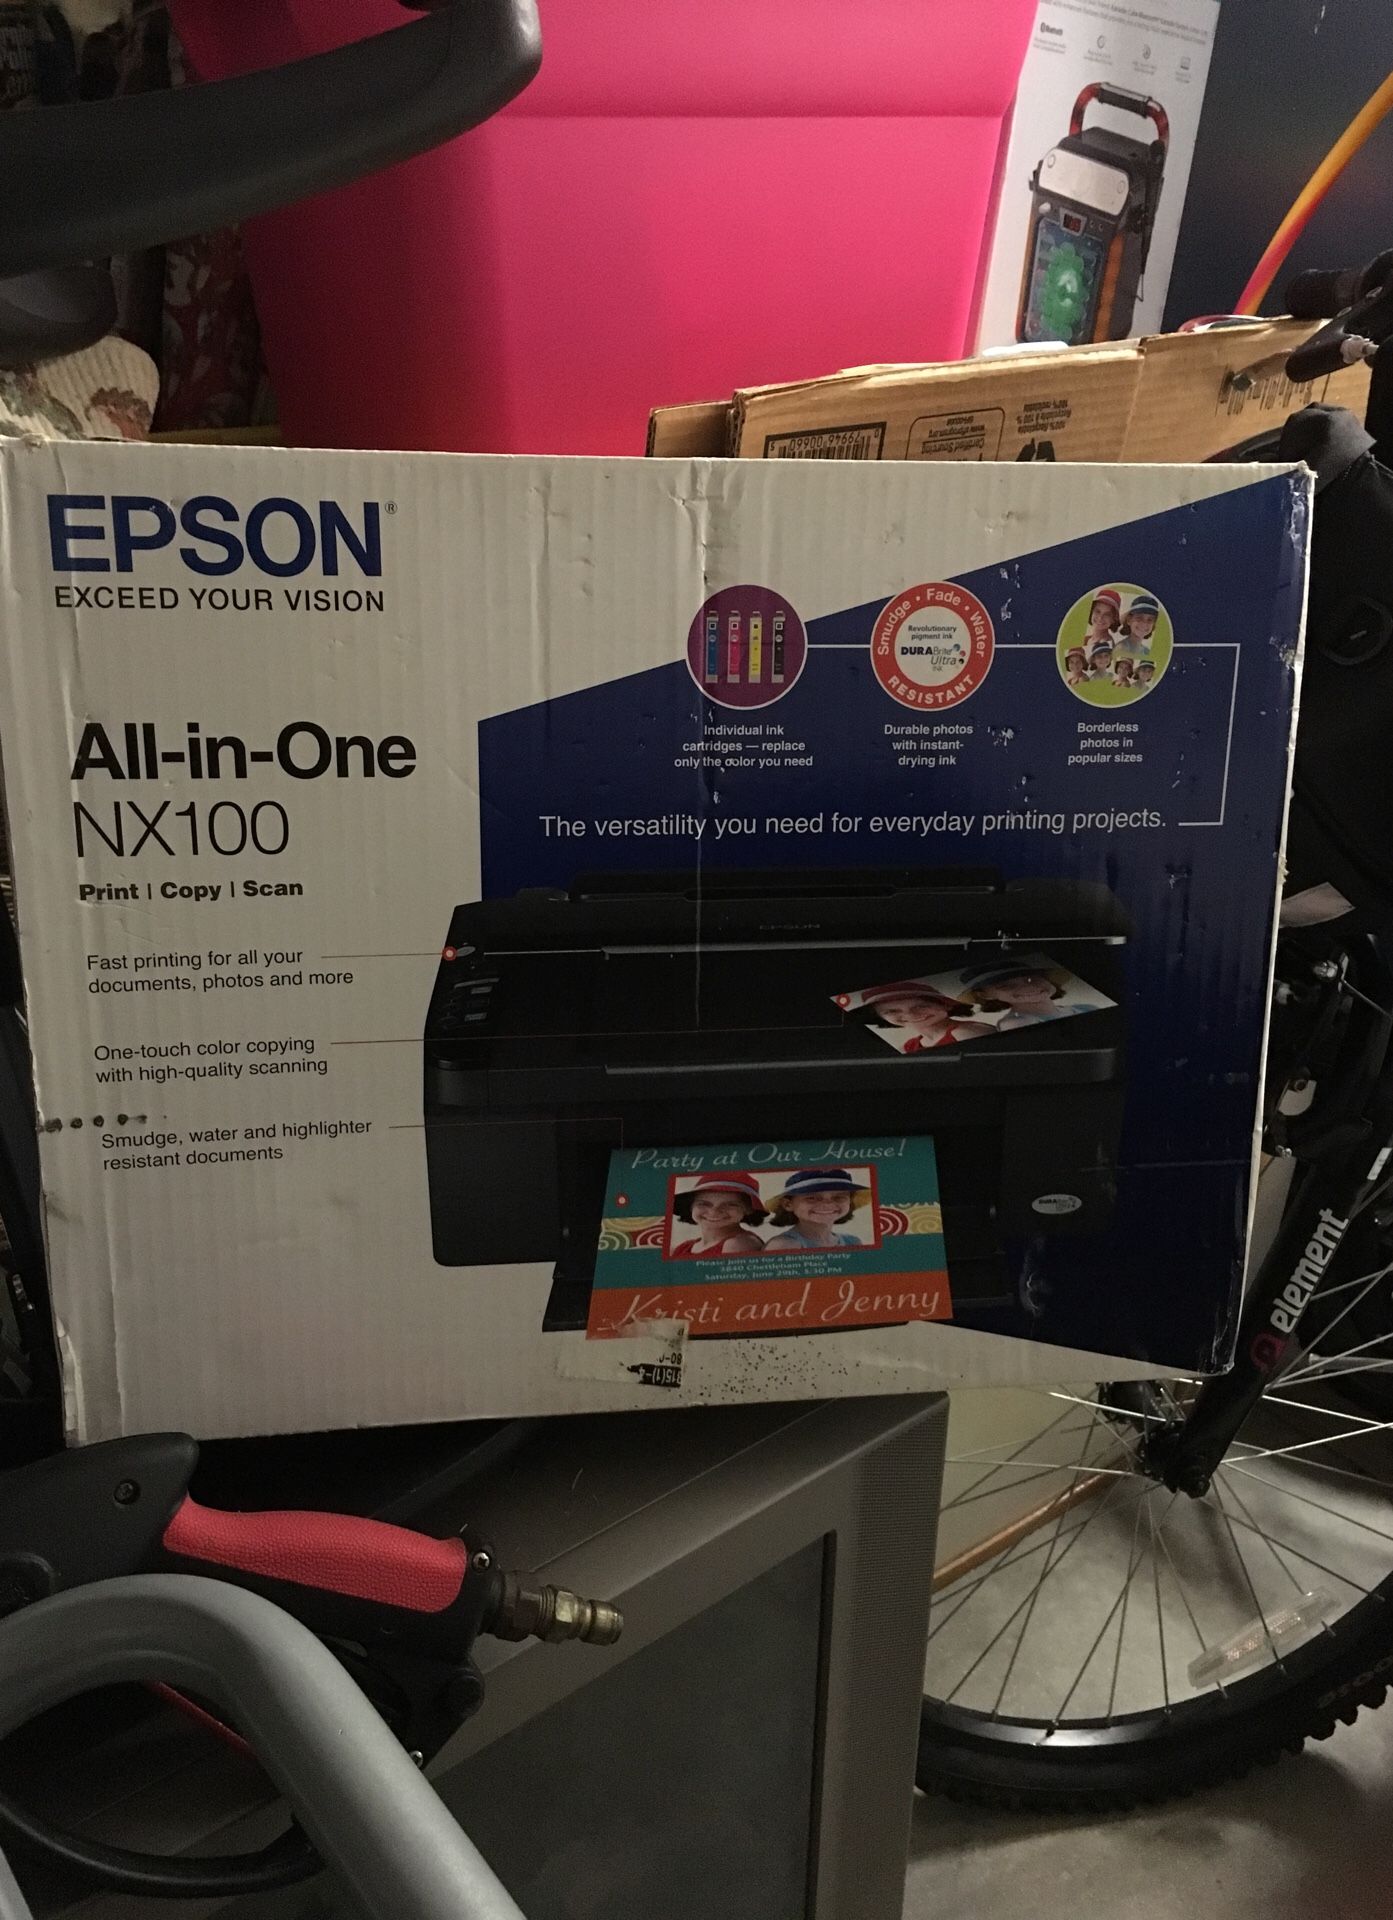 Epson All in One Printer - NX100 - Print - Copy - Scan